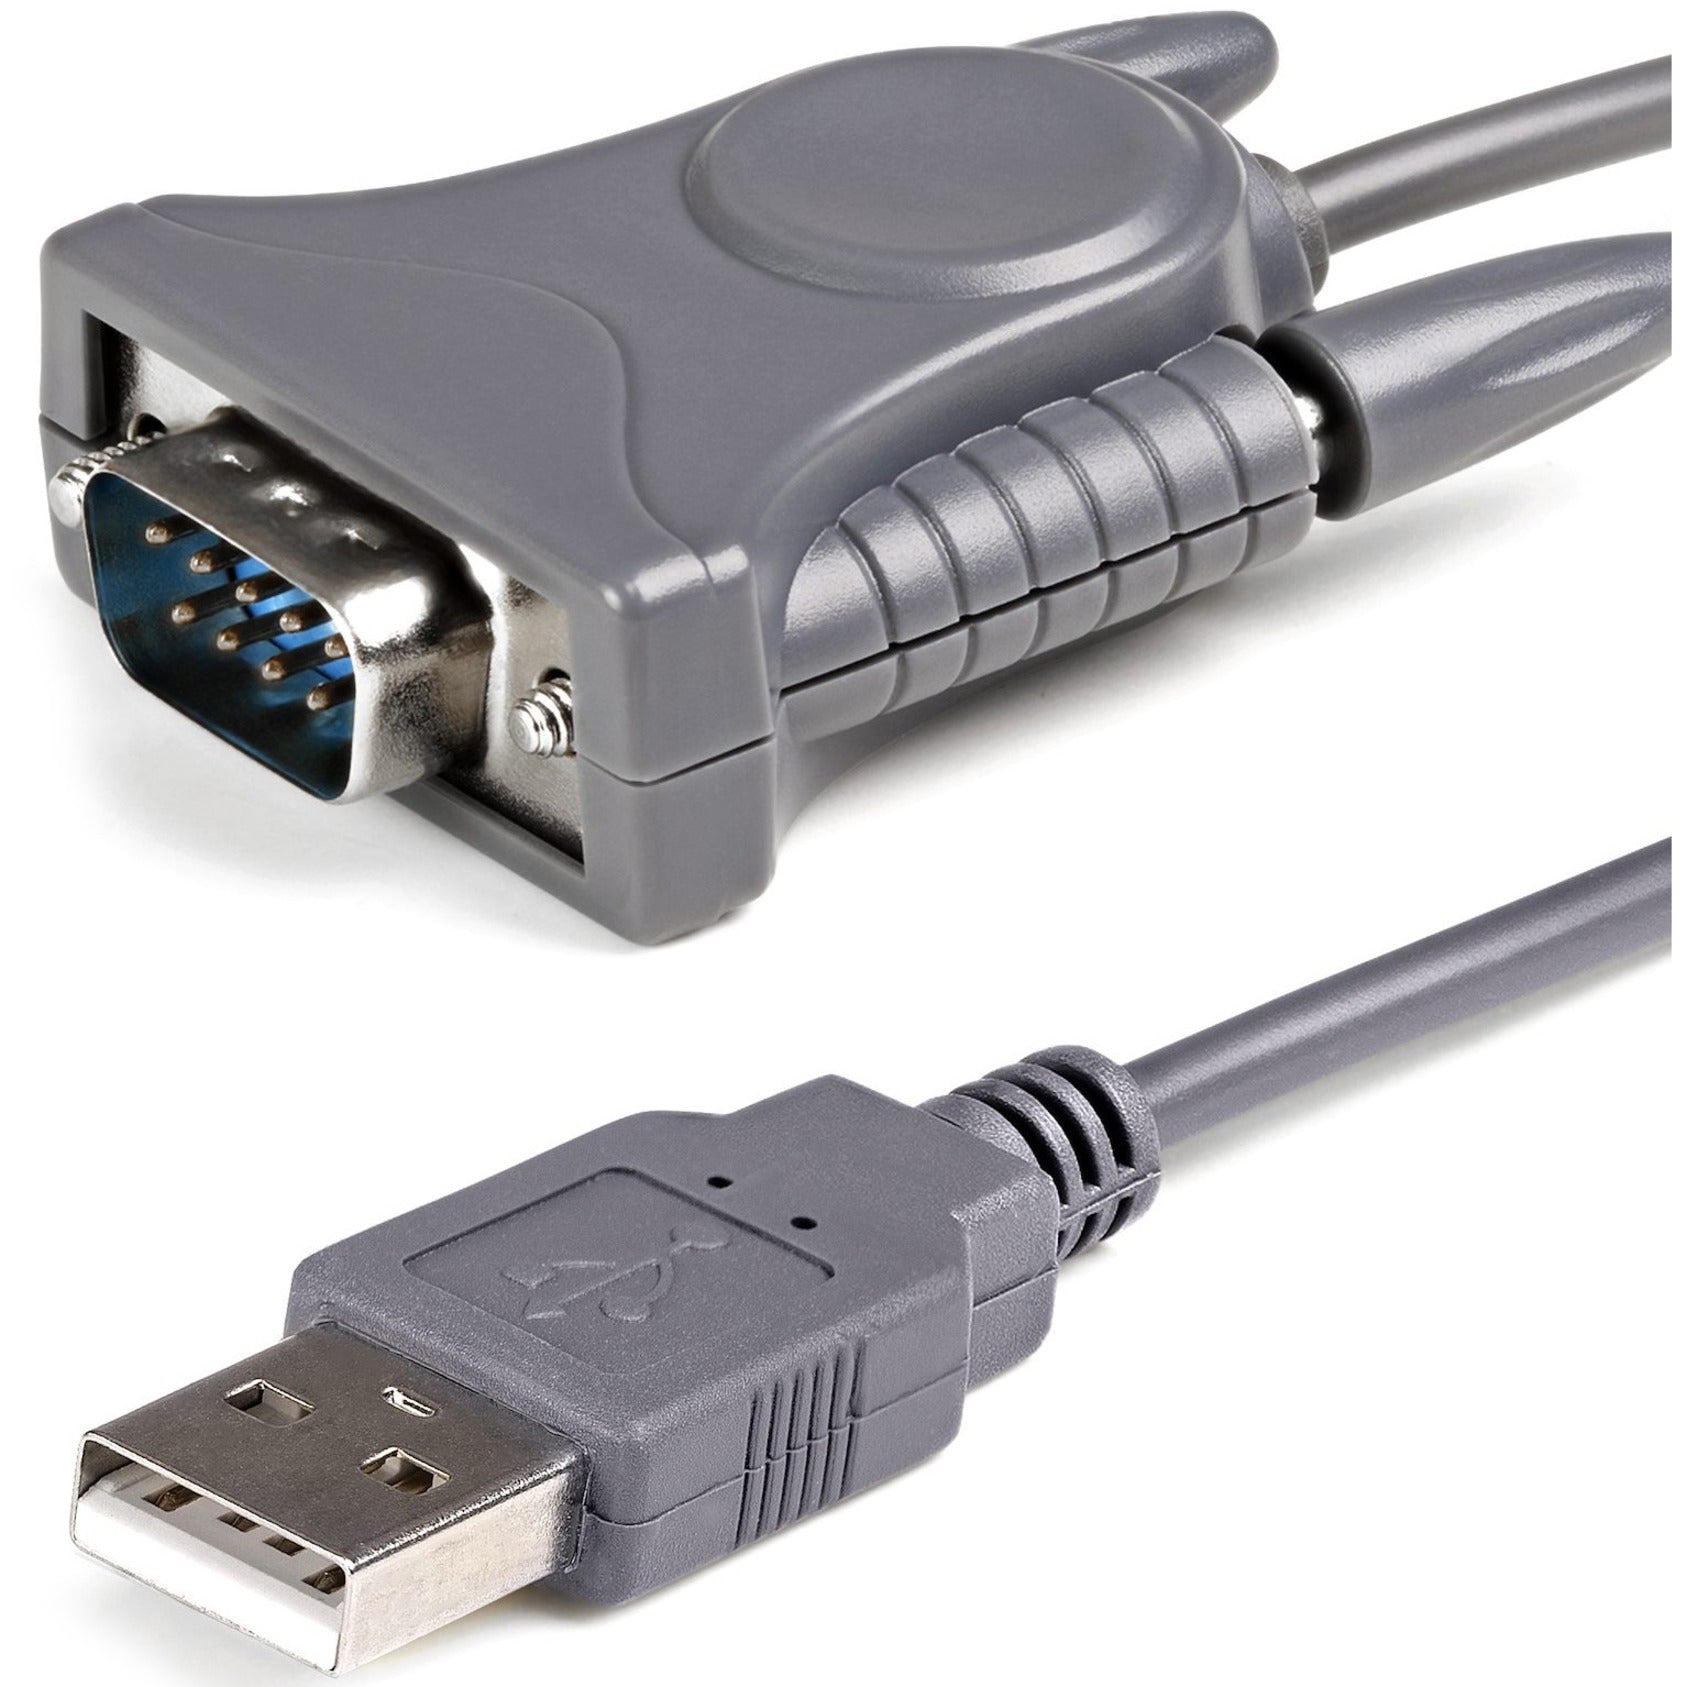 StarTech.com ICUSB232DB25 USB to RS232 DB9/DB25 Serial Adapter Cable - M/M, 3 ft, Gray